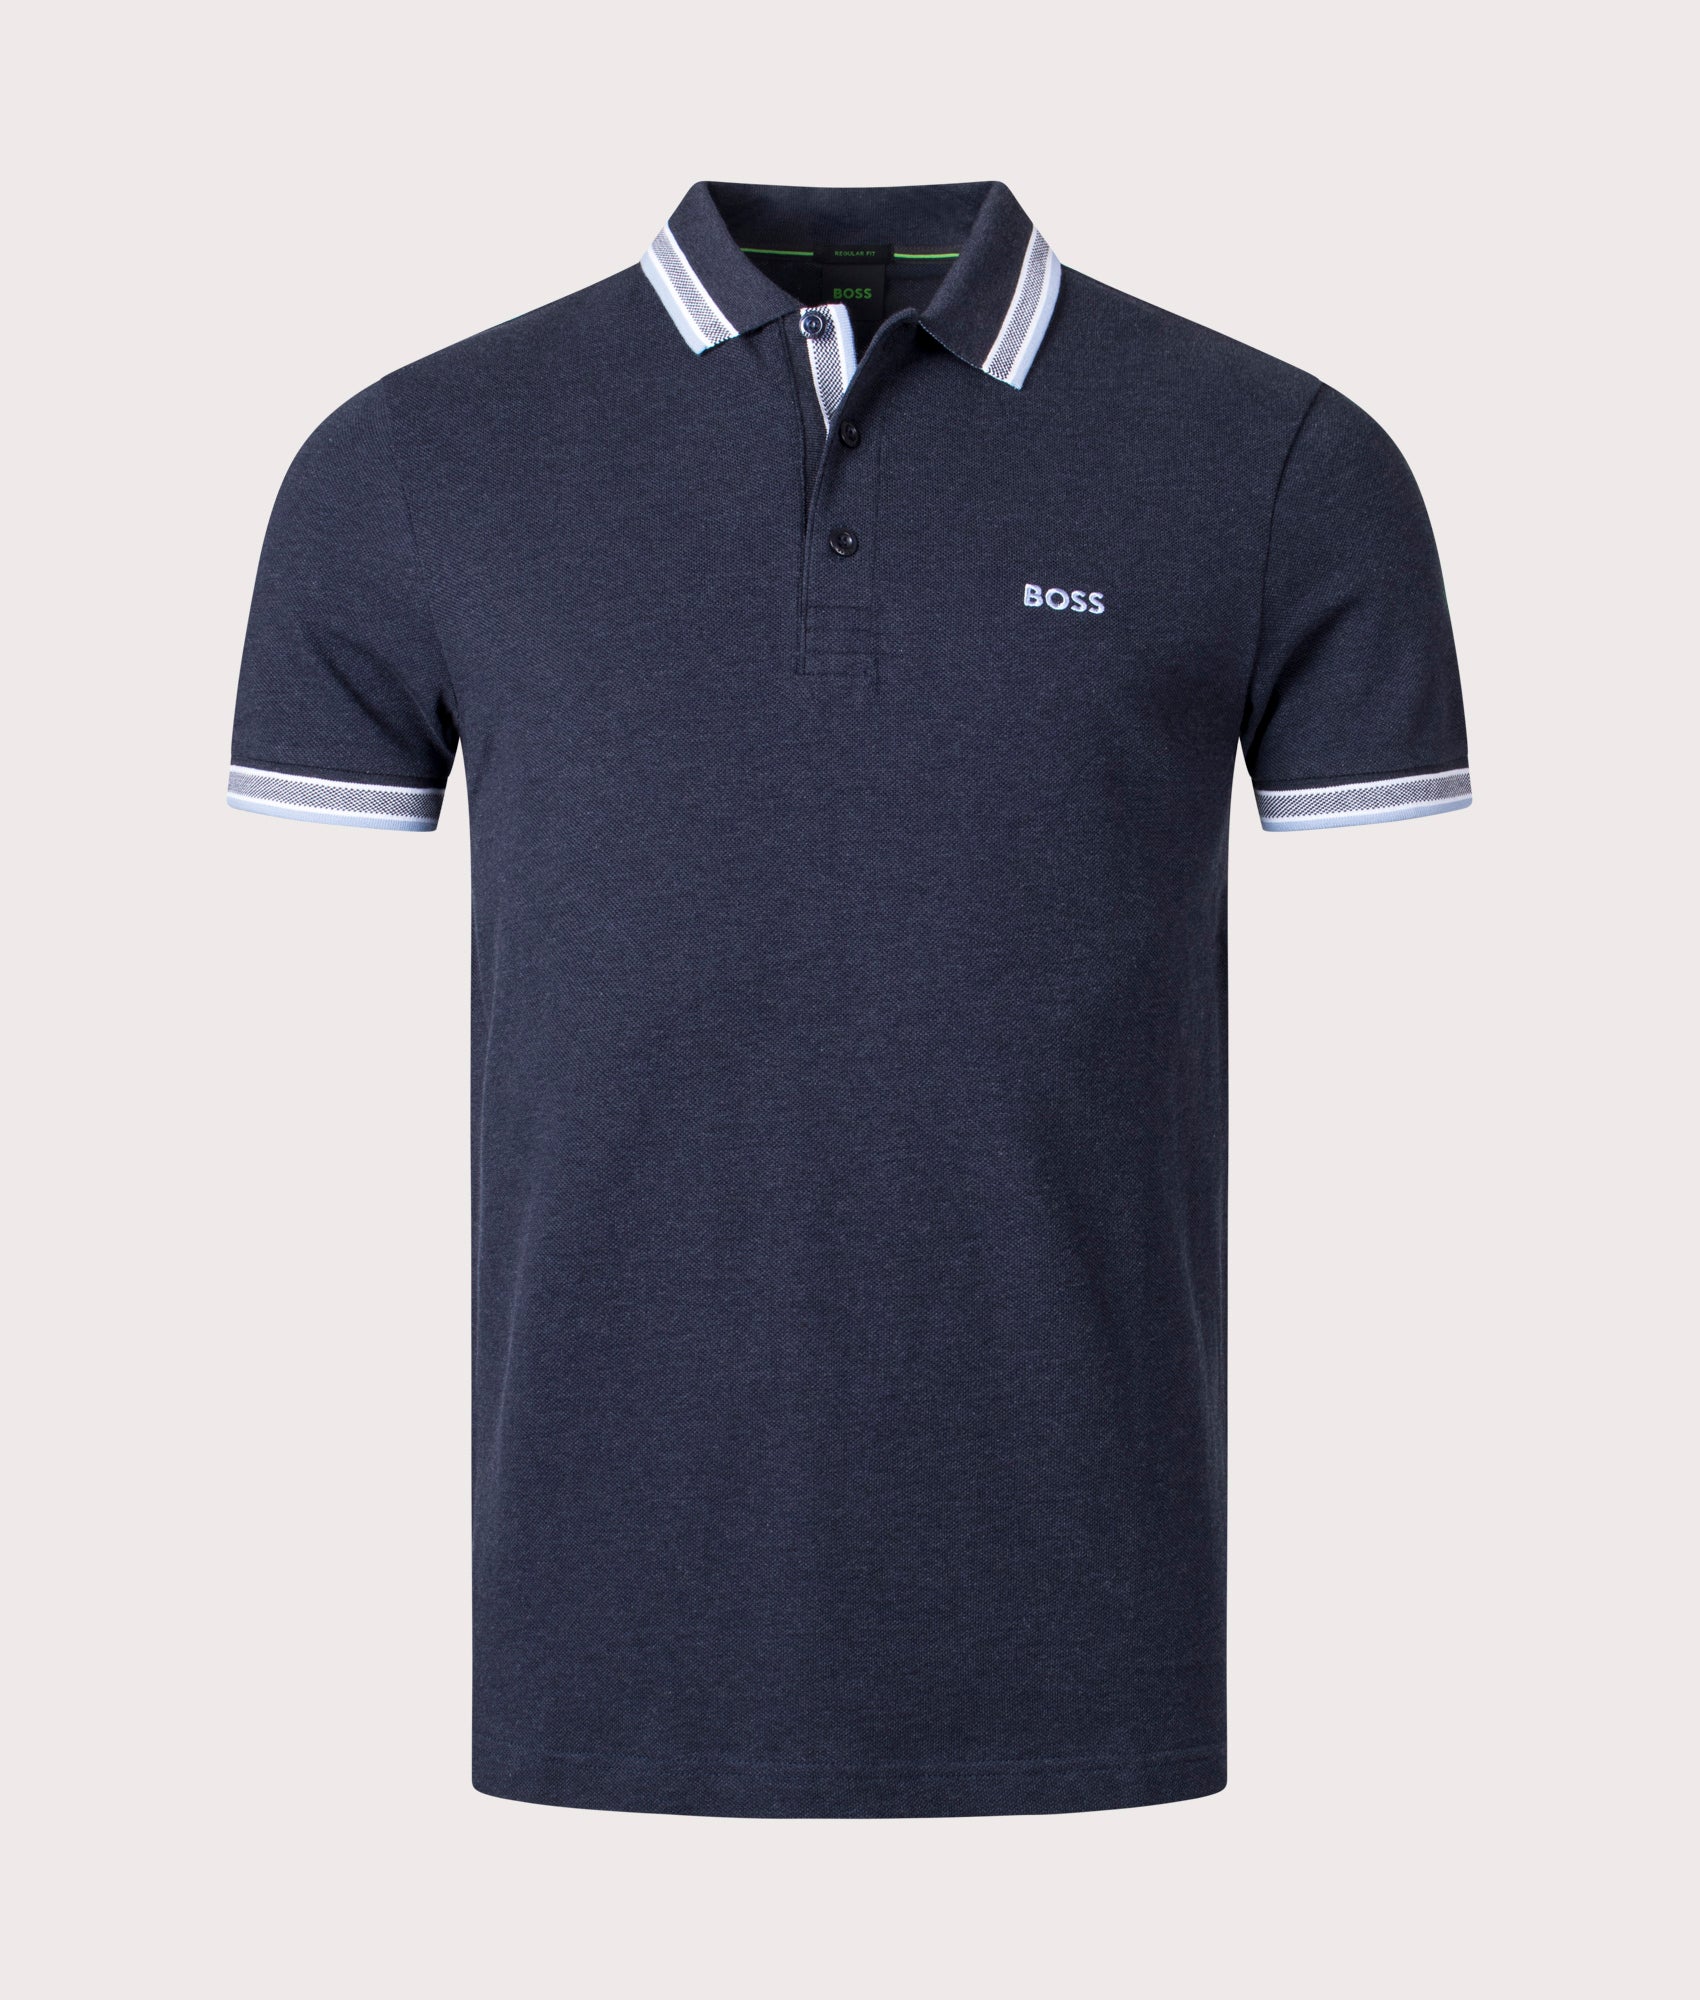 BOSS Mens Paddy Polo Shirt - Colour: 410 Navy - Size: Large